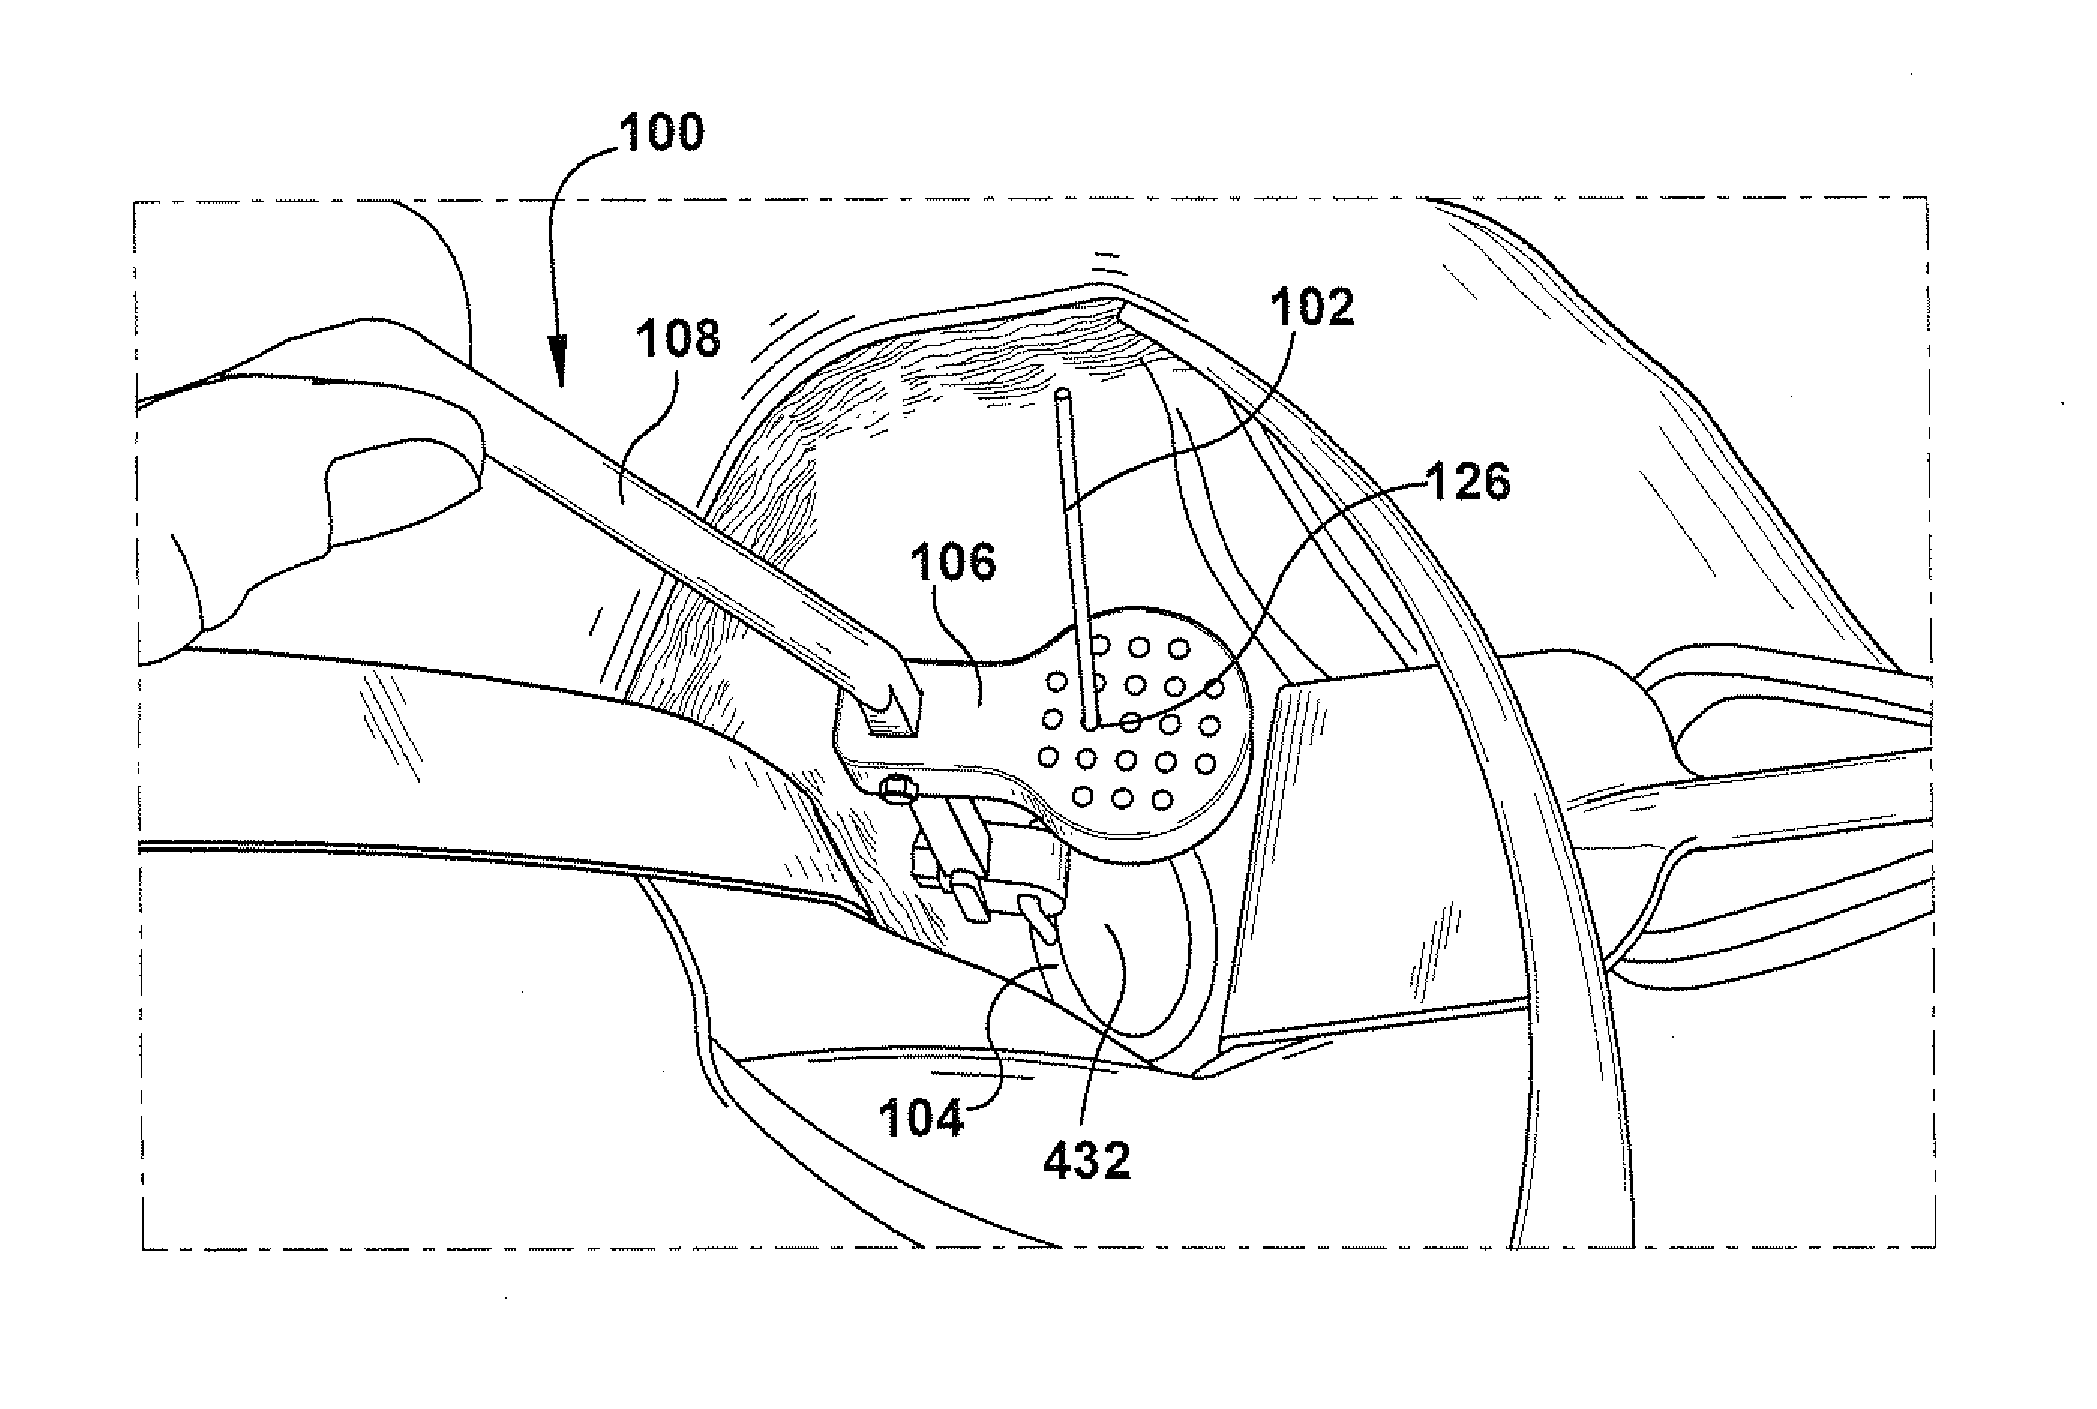 Method and apparatus for insertion of an elongate pin into a surface